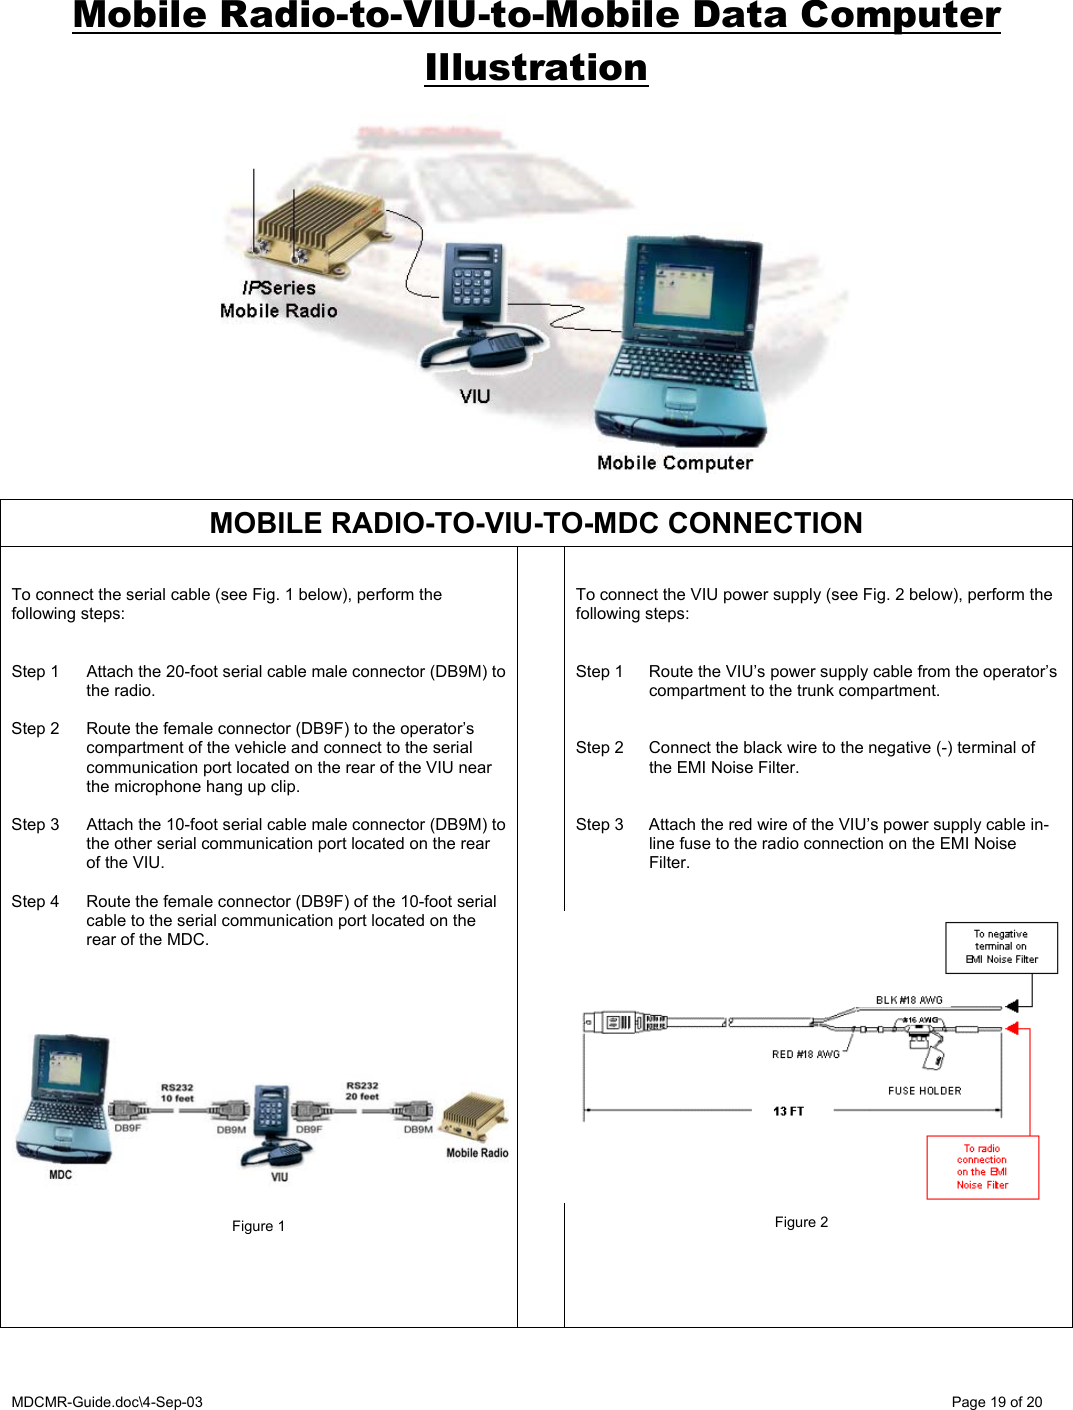 MDCMR-Guide.doc\4-Sep-03   Page 19 of 20 Mobile Radio-to-VIU-to-Mobile Data Computer Illustration                  MOBILE RADIO-TO-VIU-TO-MDC CONNECTION   To connect the serial cable (see Fig. 1 below), perform the following steps:   Step 1  Attach the 20-foot serial cable male connector (DB9M) to the radio.  Step 2  Route the female connector (DB9F) to the operator’s compartment of the vehicle and connect to the serial communication port located on the rear of the VIU near the microphone hang up clip.  Step 3  Attach the 10-foot serial cable male connector (DB9M) to the other serial communication port located on the rear of the VIU.  Step 4  Route the female connector (DB9F) of the 10-foot serial cable to the serial communication port located on the rear of the MDC.               Figure 1         To connect the VIU power supply (see Fig. 2 below), perform the following steps:   Step 1  Route the VIU’s power supply cable from the operator’s compartment to the trunk compartment.   Step 2  Connect the black wire to the negative (-) terminal of the EMI Noise Filter.   Step 3  Attach the red wire of the VIU’s power supply cable in-line fuse to the radio connection on the EMI Noise Filter.                   Figure 2 